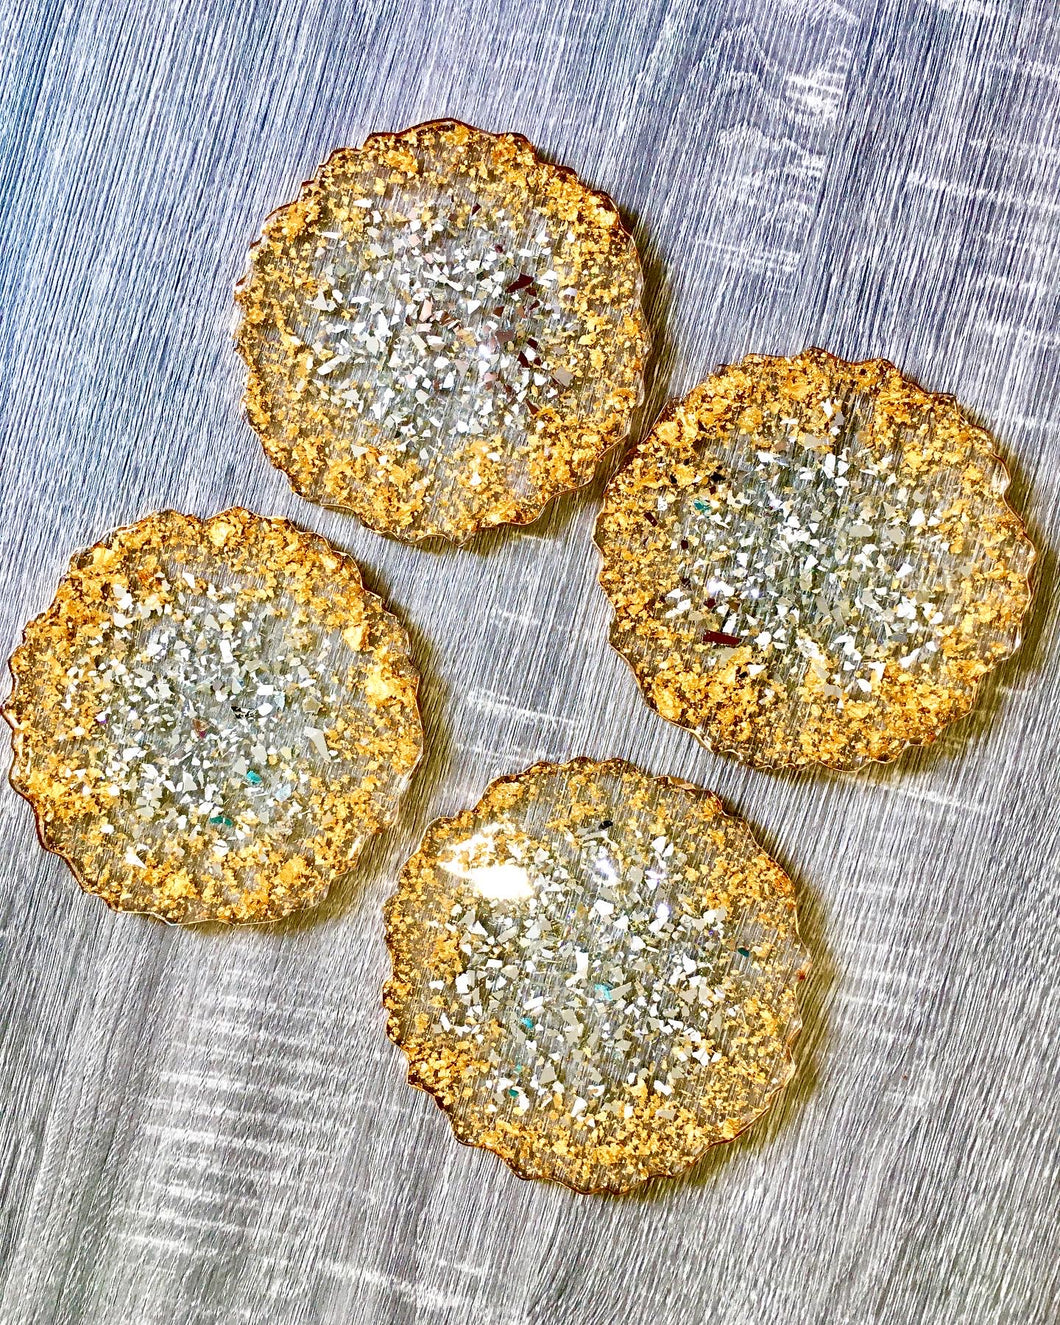 Mirror and Gold Coaster Set of 4 - Resin, Mirror & Gold Leaf